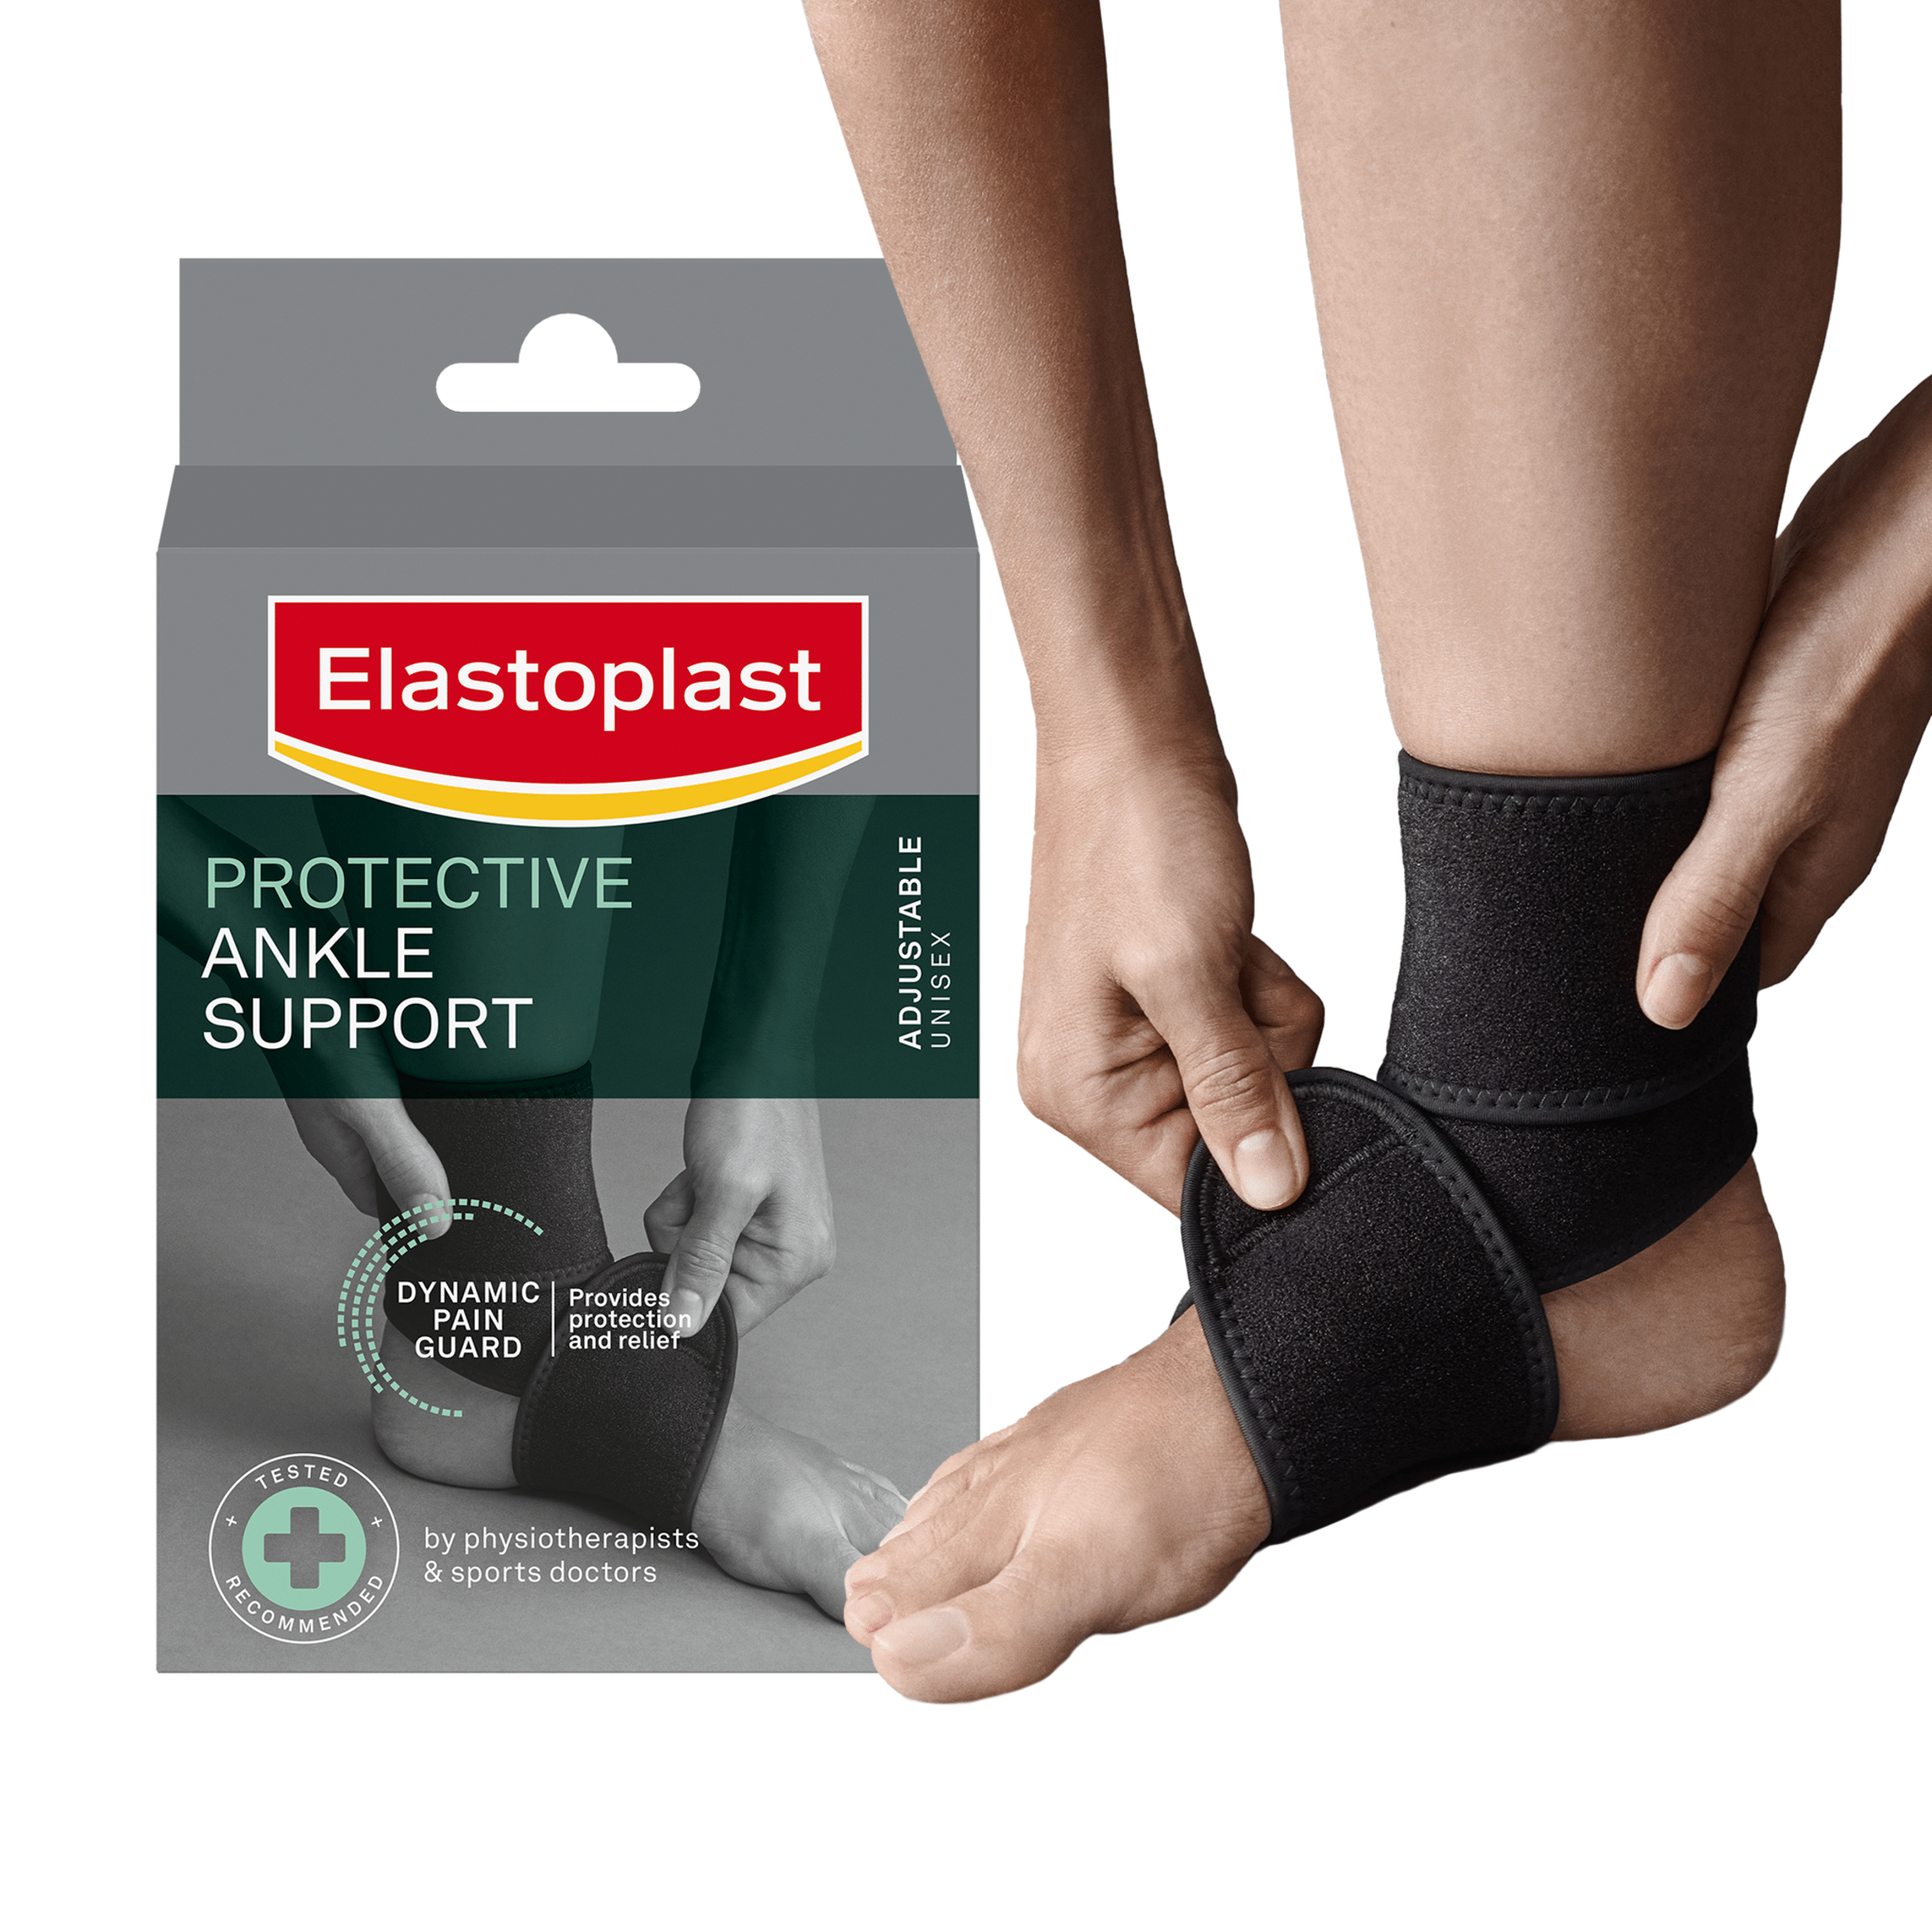 https://images-us.eucerin.com/~/media/hansaplast/local/gb/sports/protective/ankle/ep%20%20protective%20ankle%20support%201%20product%20zoom.png?rx=0&ry=0&rw=2400&rh=2400&hash=699470963DD13D0B75BD224FA7E39D90